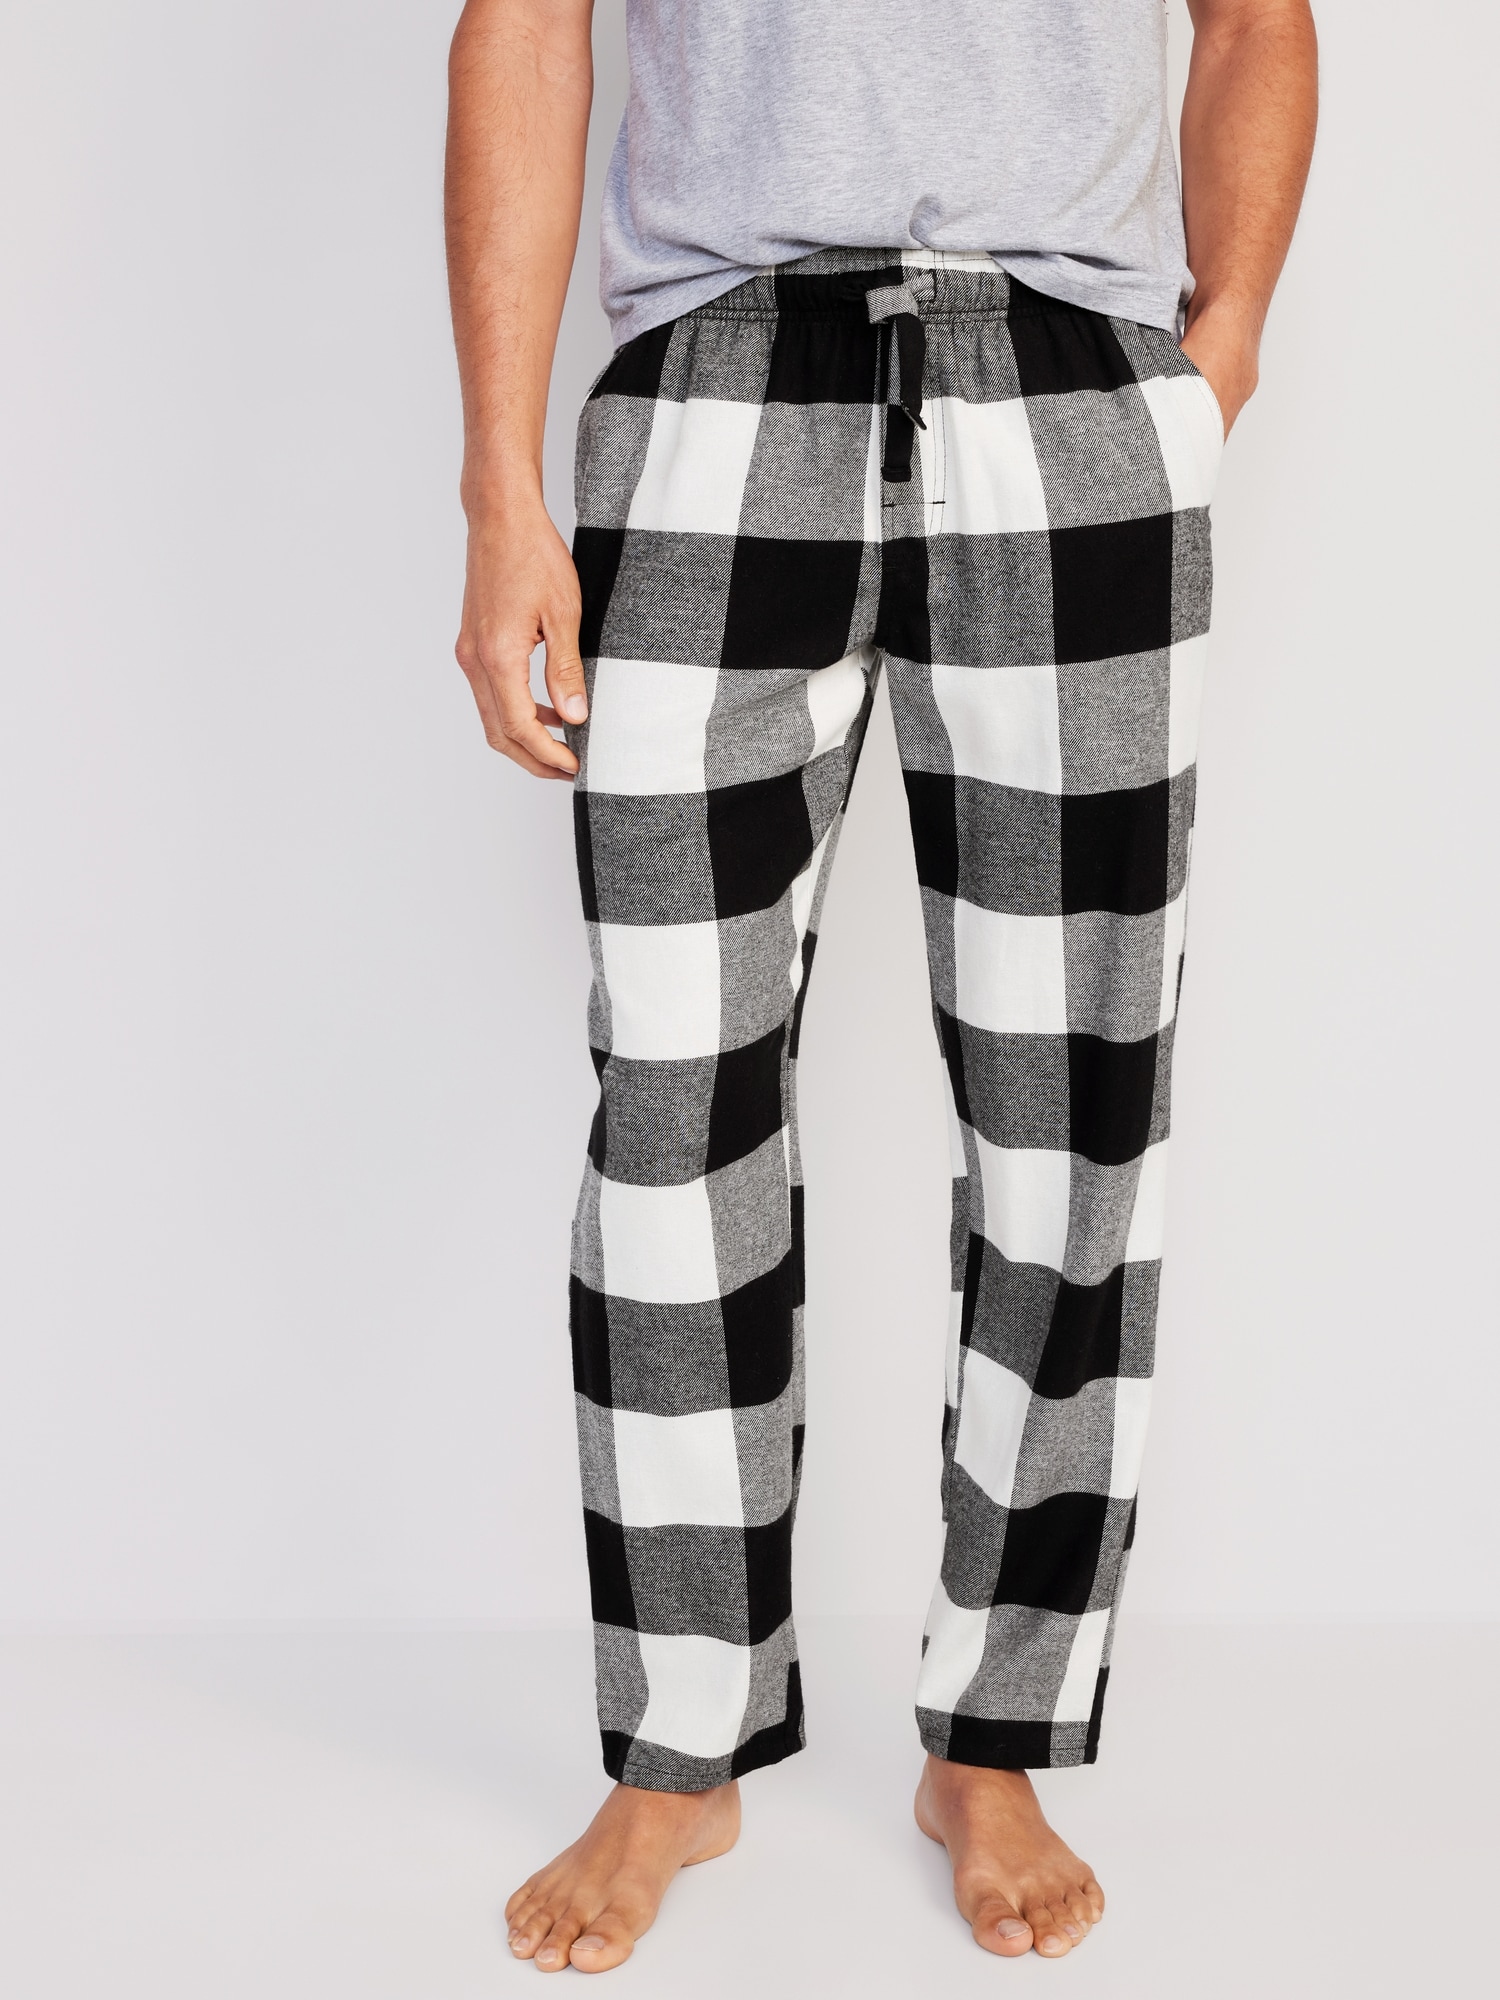 Matching Flannel Pajama Pants | Old Navy